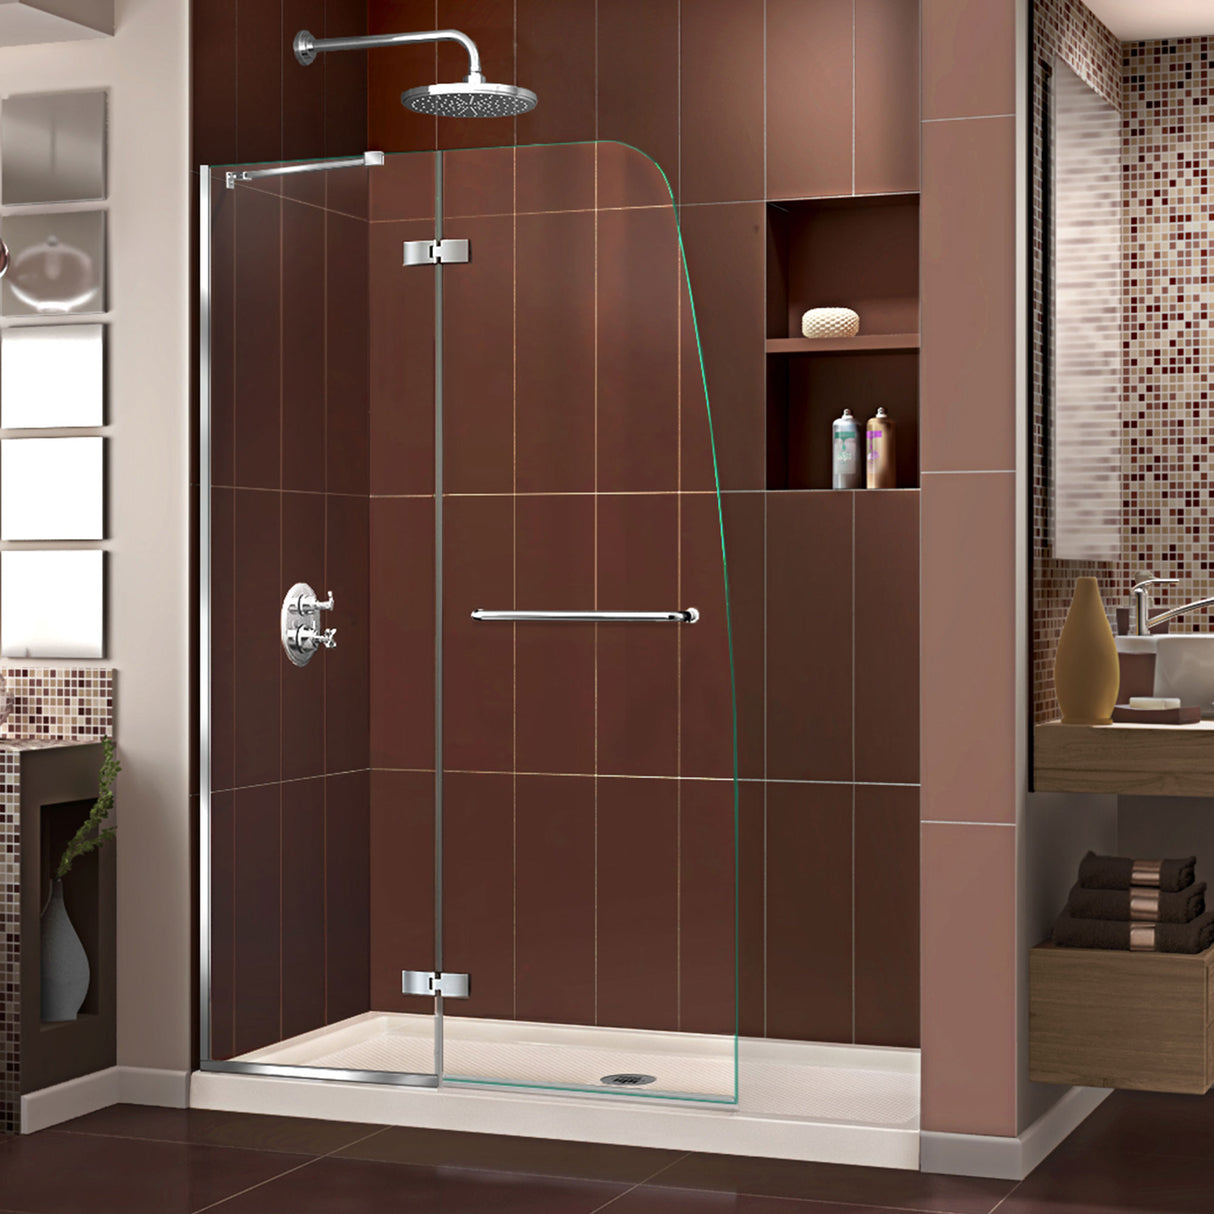 DreamLine Aqua Ultra 34 in. D x 60 in. W x 74 3/4 in. H Frameless Shower Door in Chrome and Center Drain Biscuit Base Kit